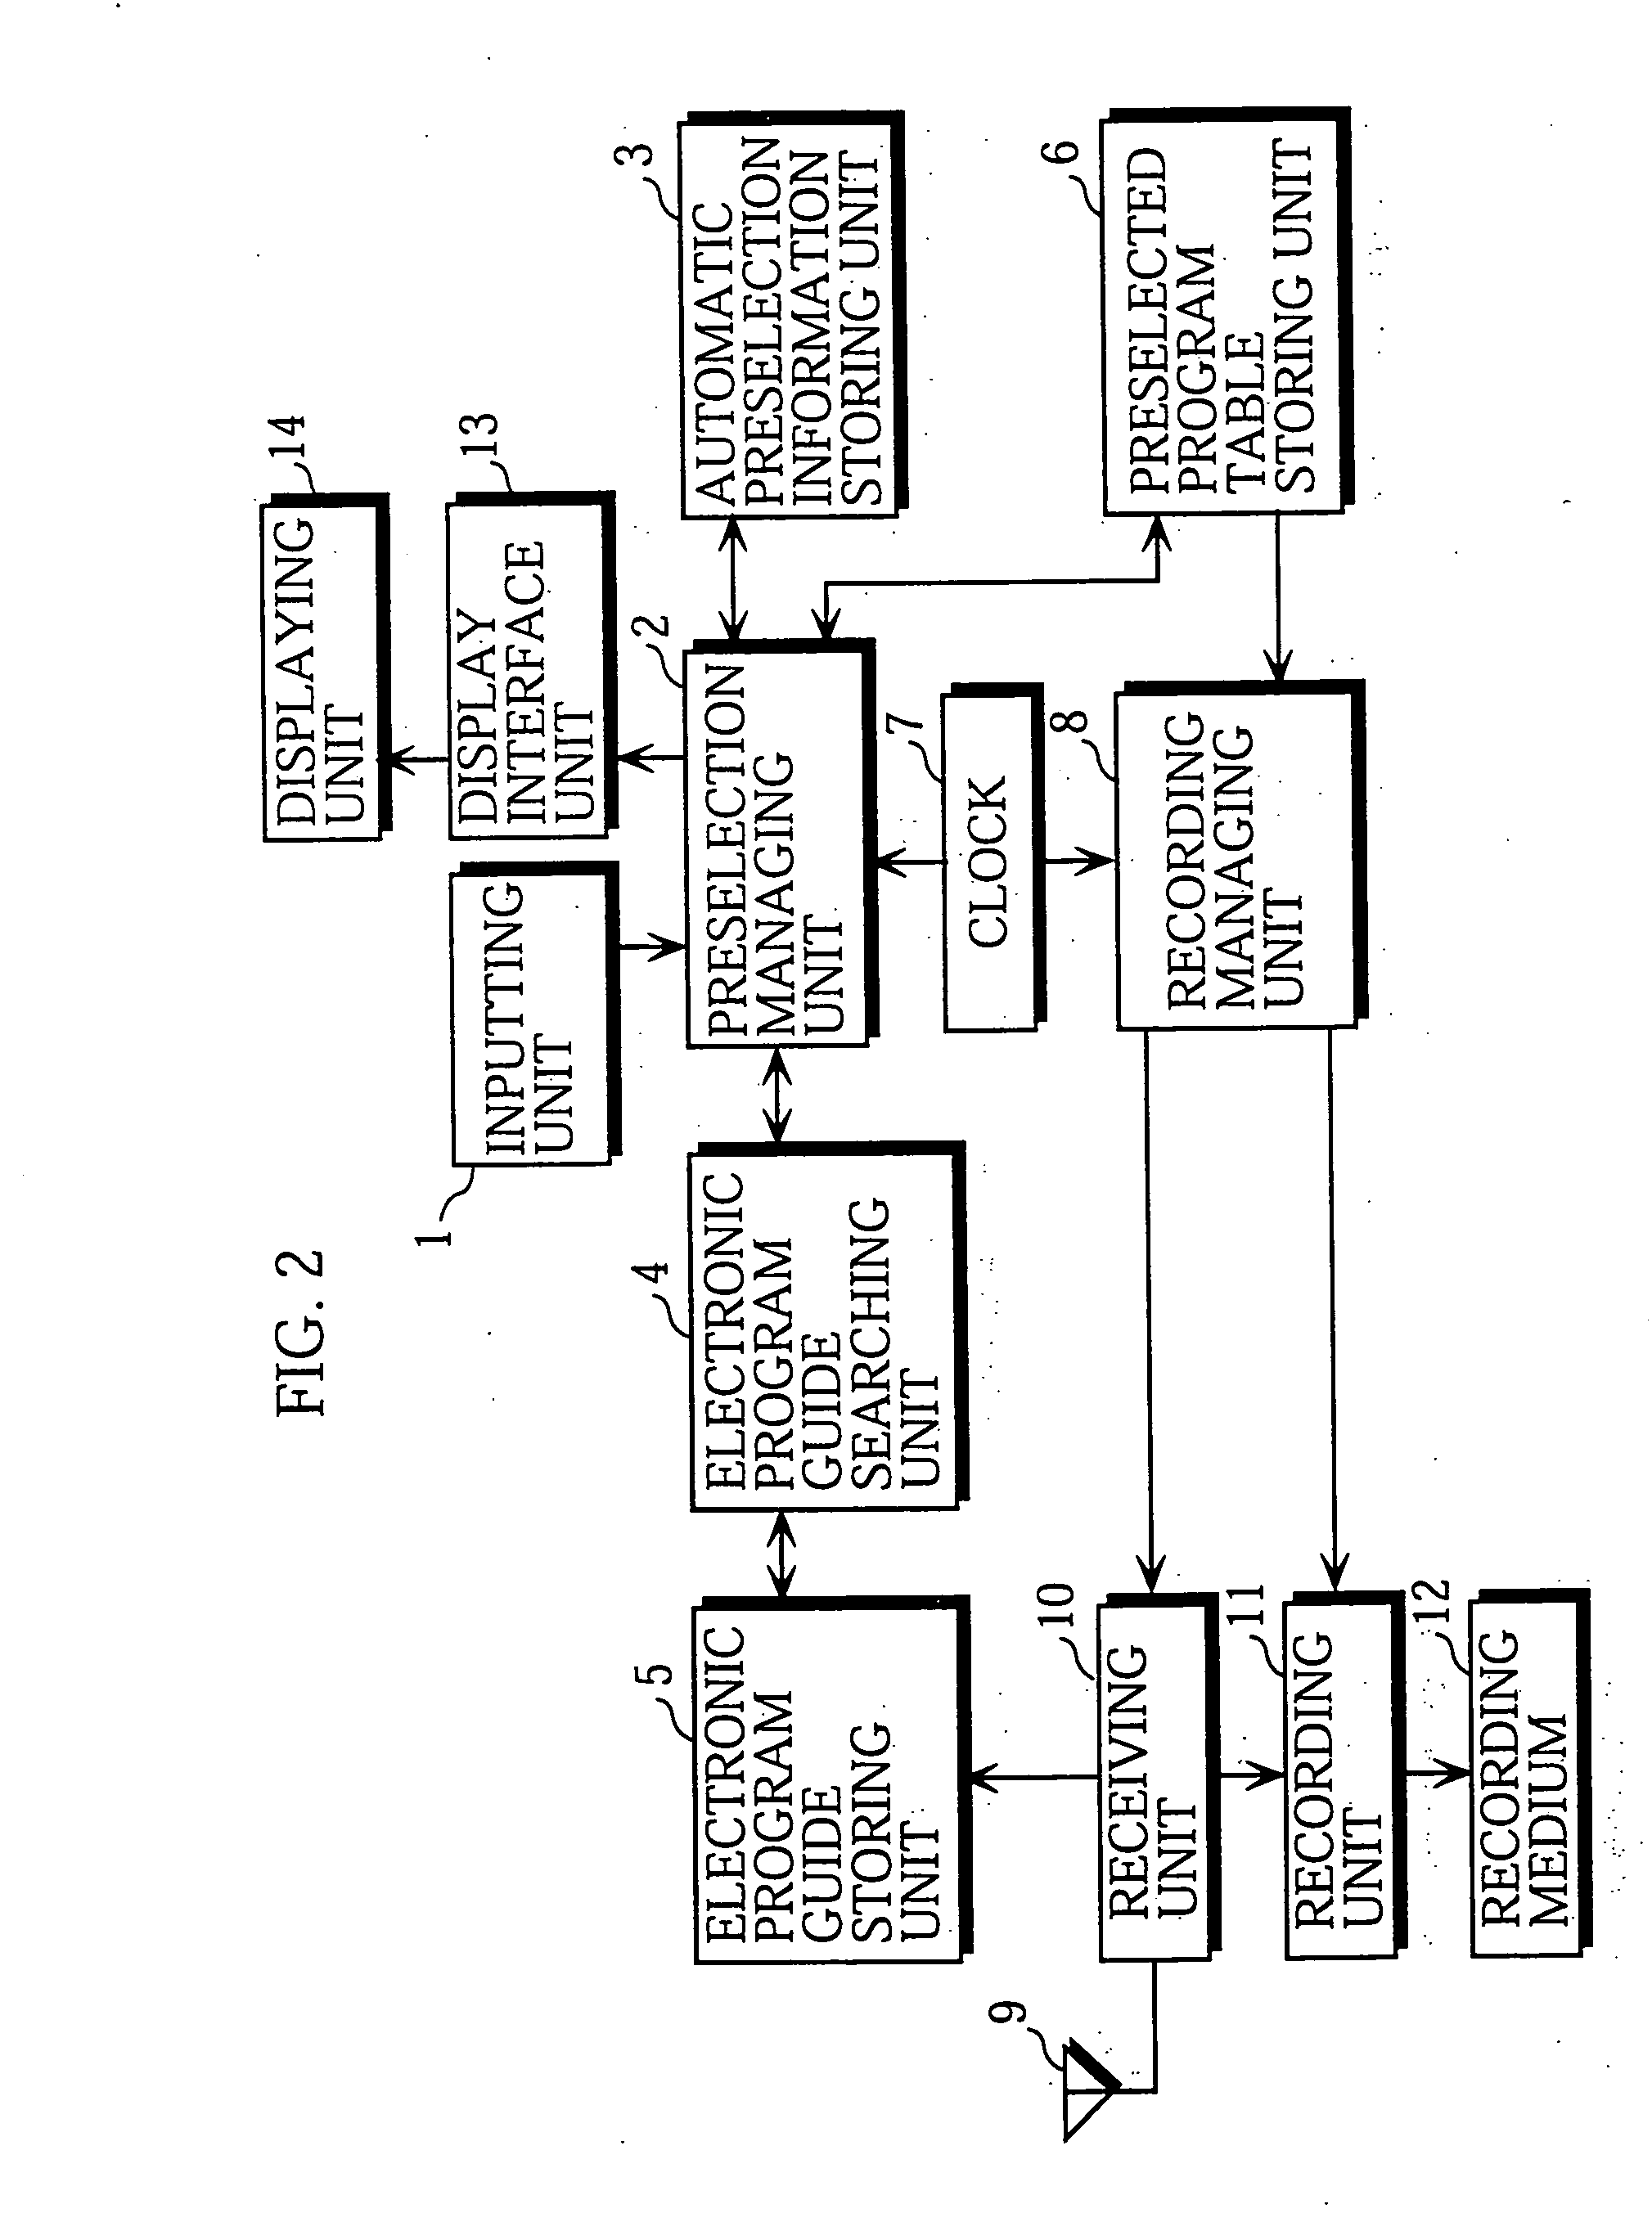 Program preselecting/recording apparatus for searching an electronic program guide for programs according to predetermined search criteria